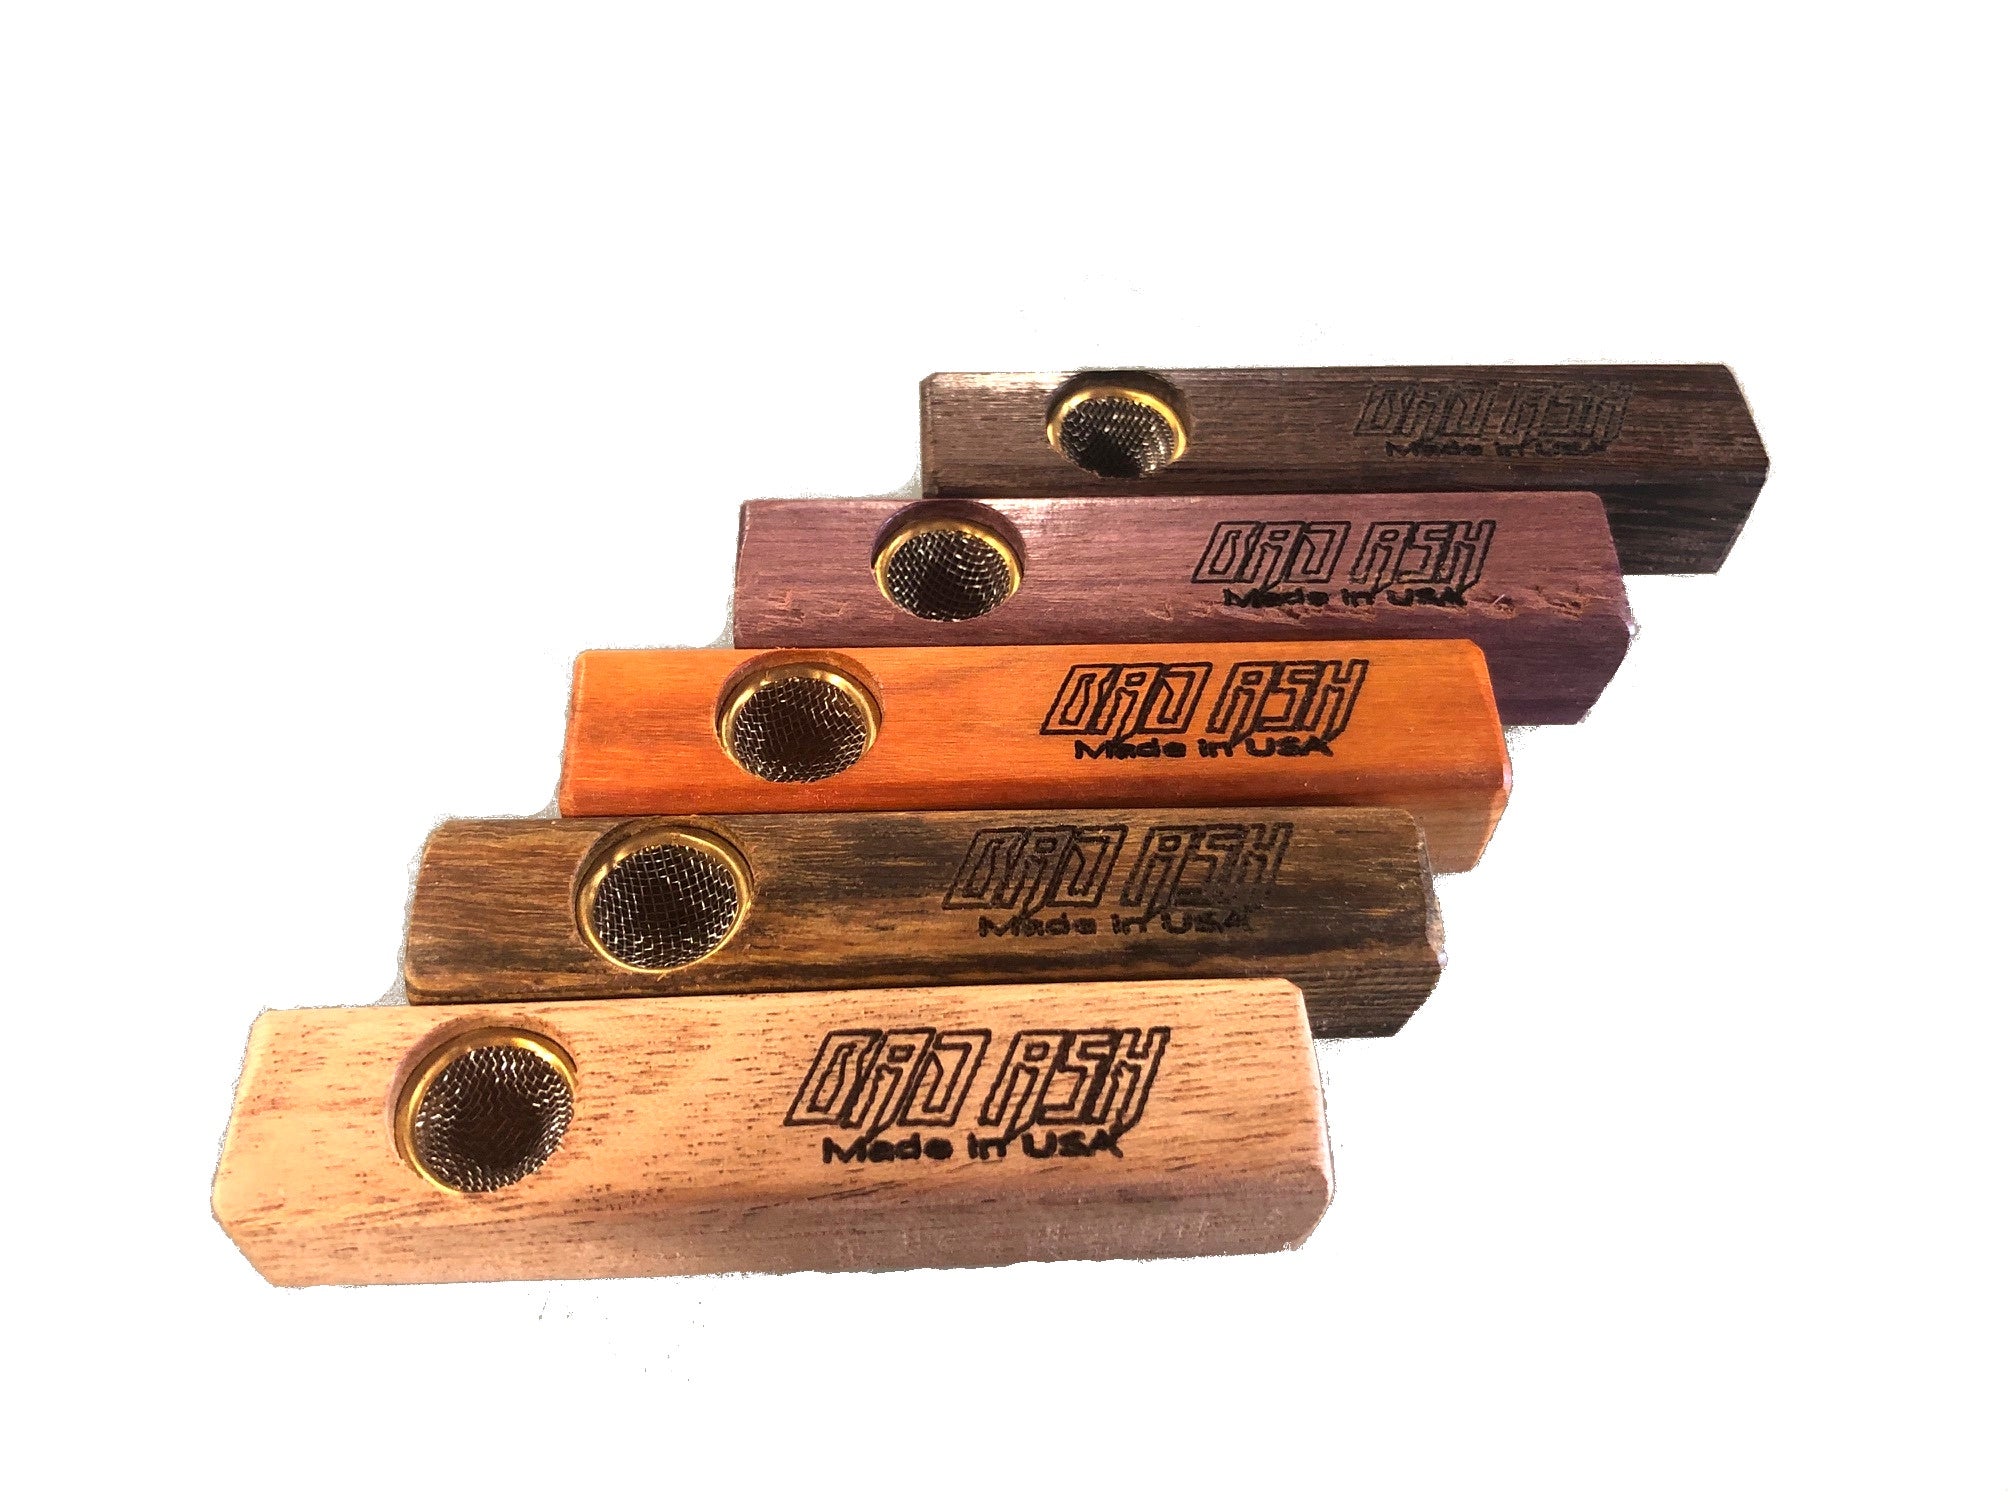 Bad Ash Wooden Pipe Block with Screen (MSRP: $9.99)